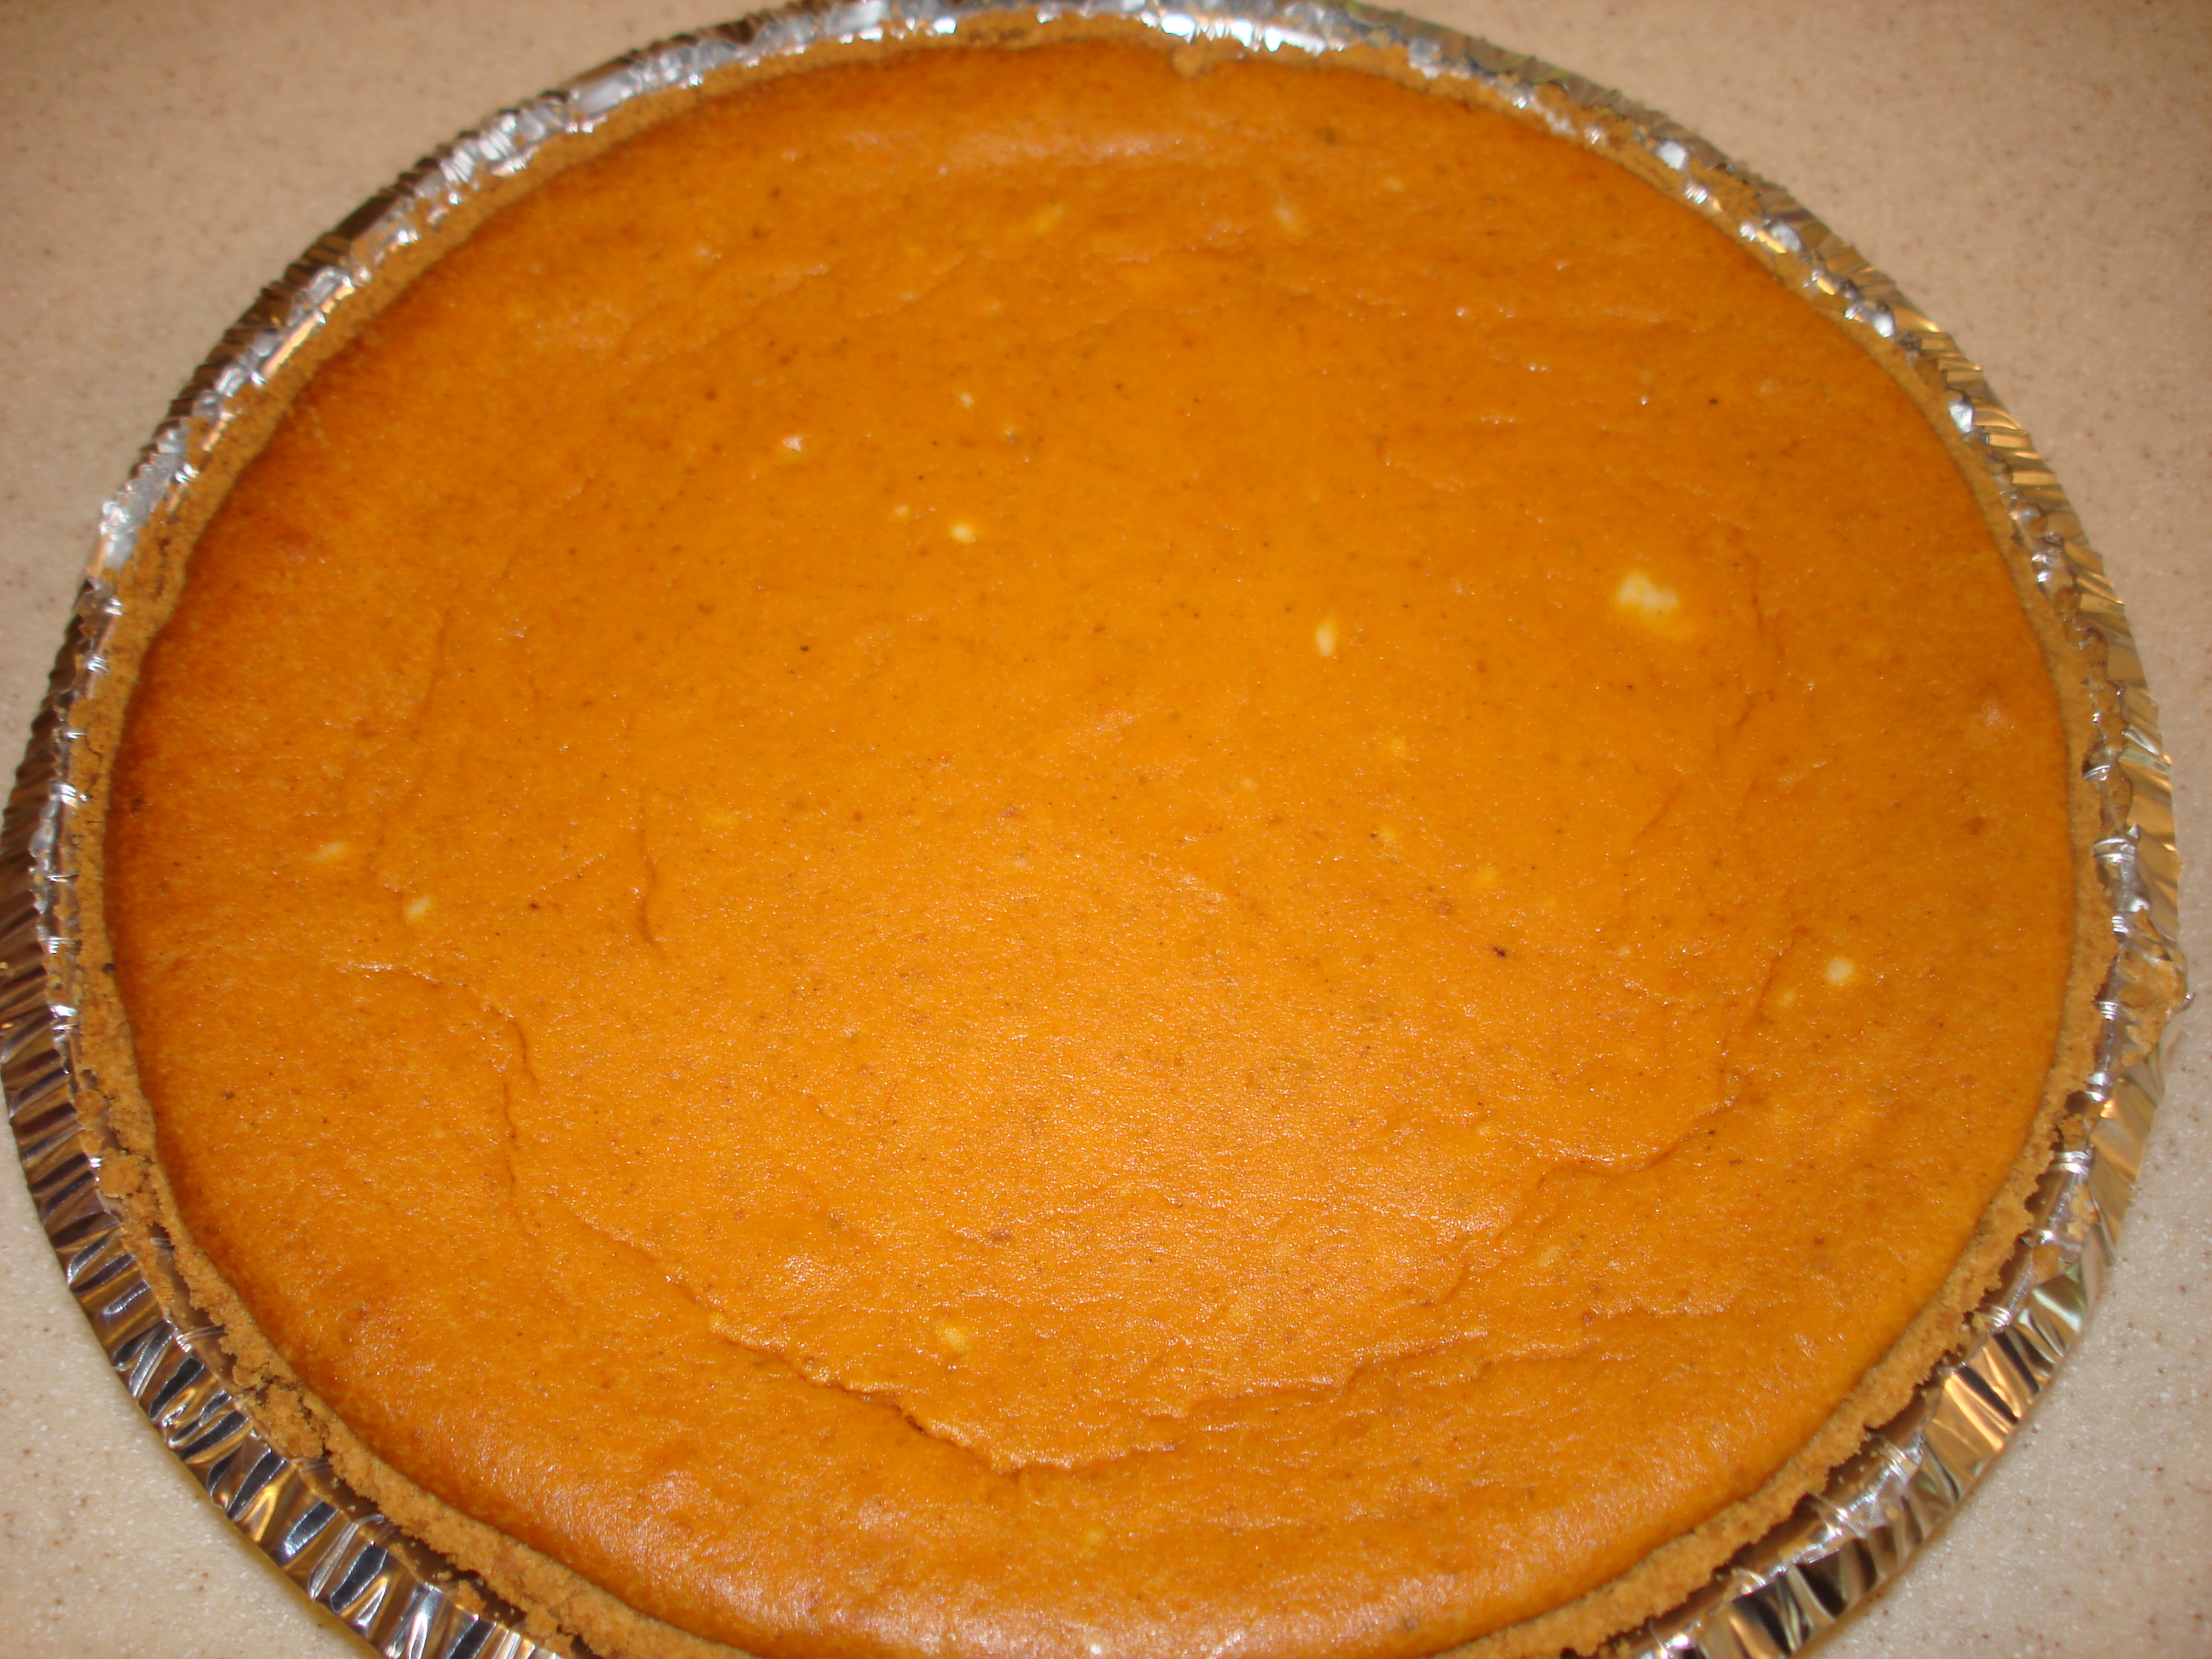 A foodie recipe for making an easy Thanksgiving Pumpkin cheesecake dessert.